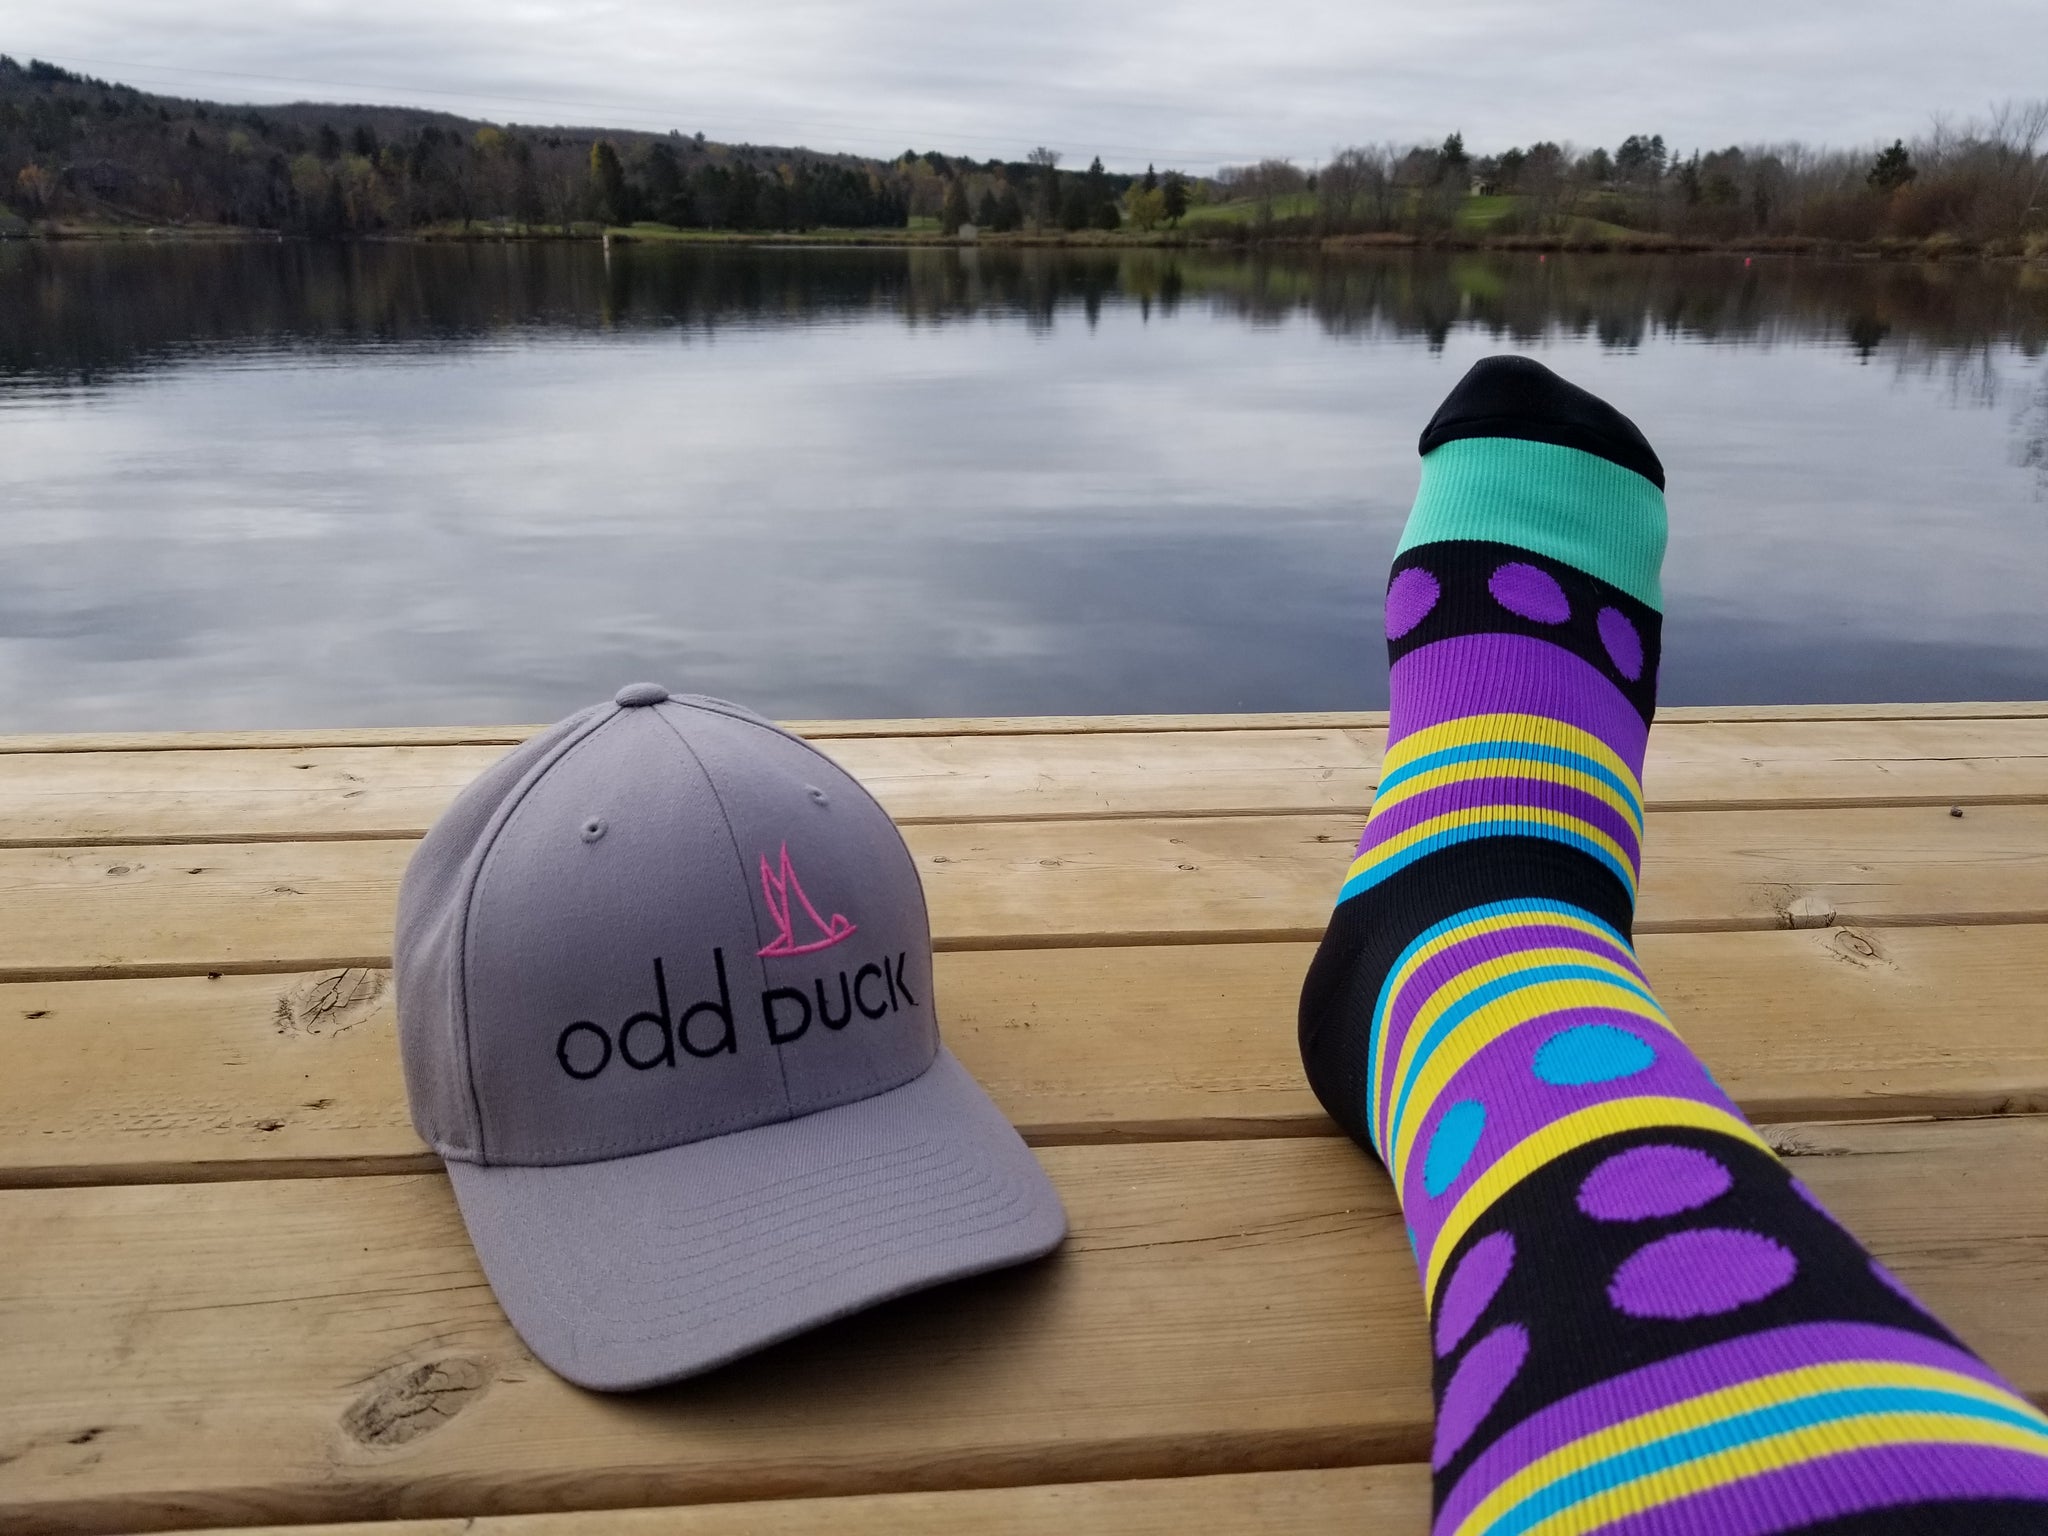 Senior Fashion Statement: Why Odd Duck Compression Stockings are a Must-Have